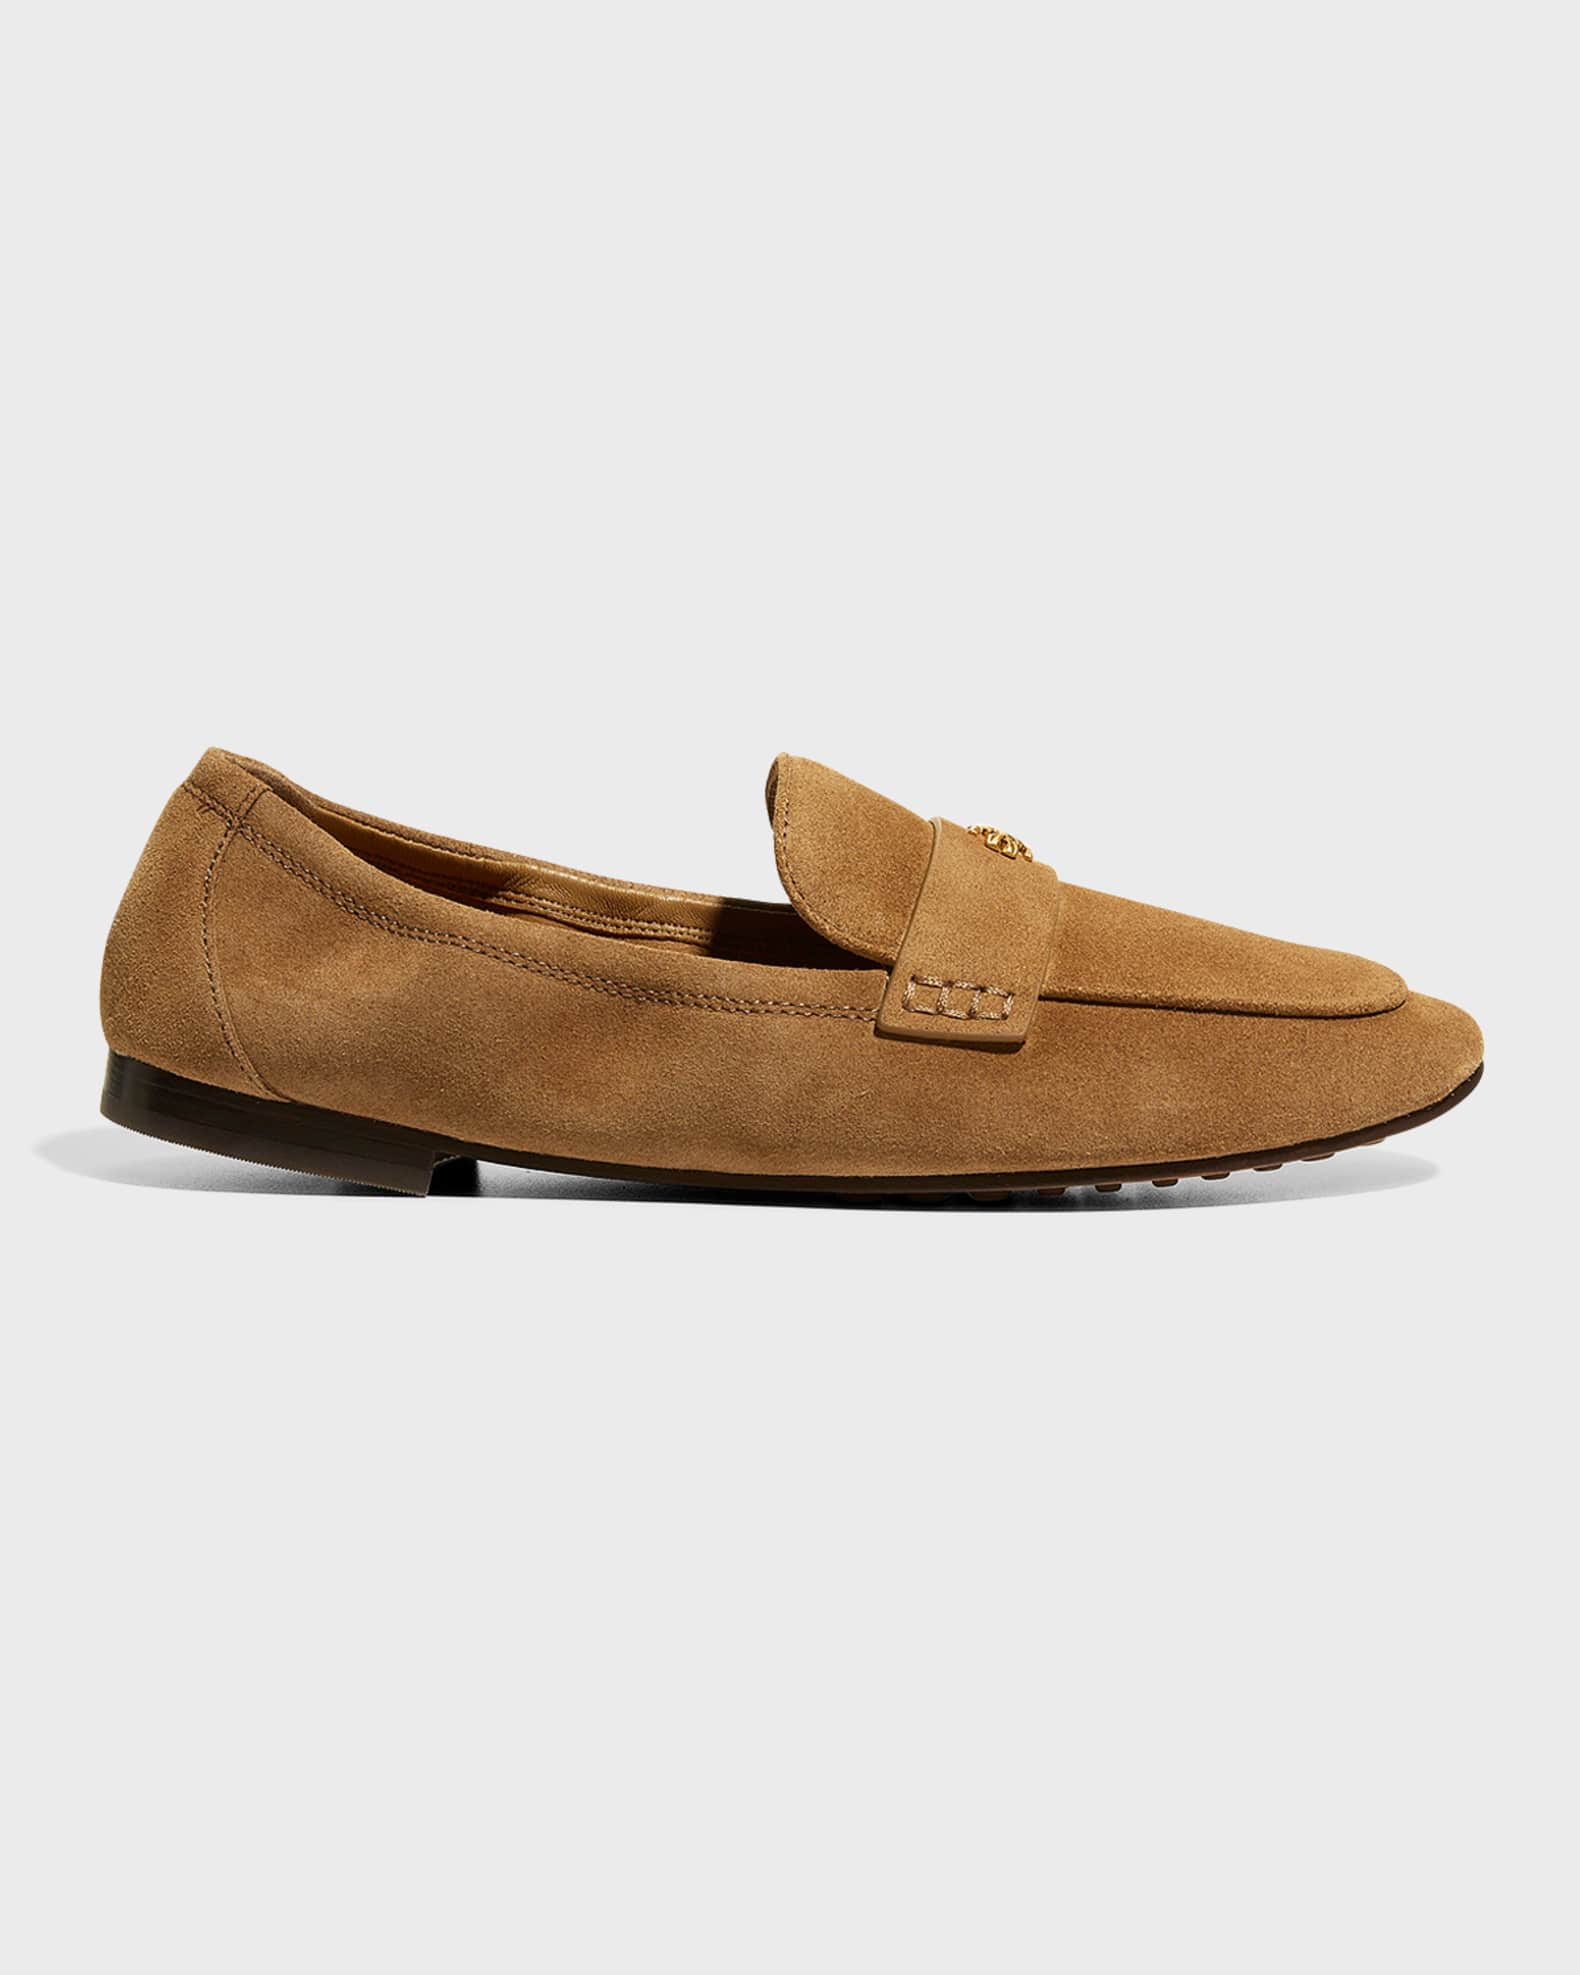 Tory Burch Ballet Loafers | Neiman Marcus